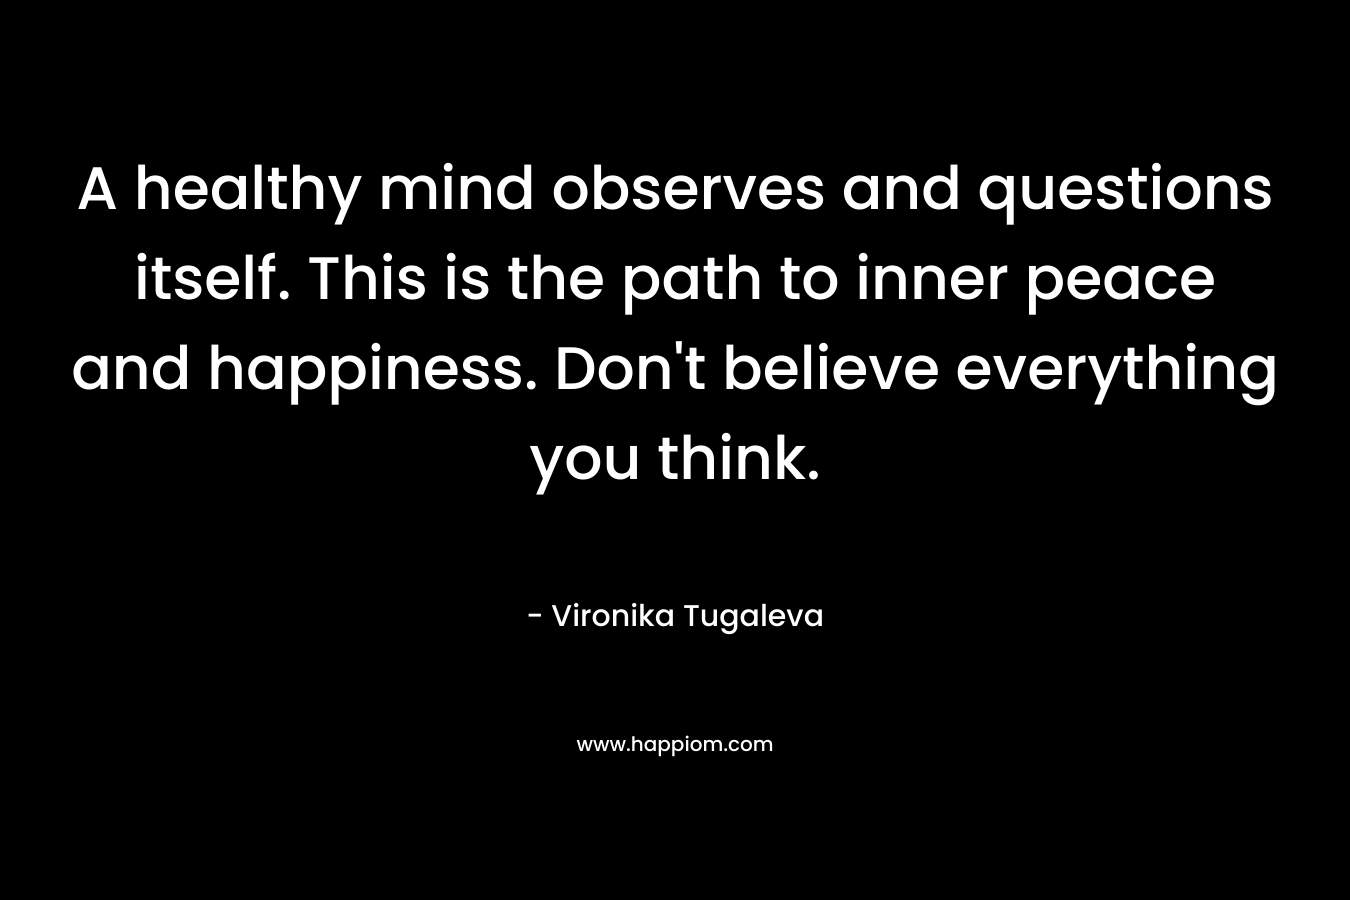 A healthy mind observes and questions itself. This is the path to inner peace and happiness. Don’t believe everything you think. – Vironika Tugaleva